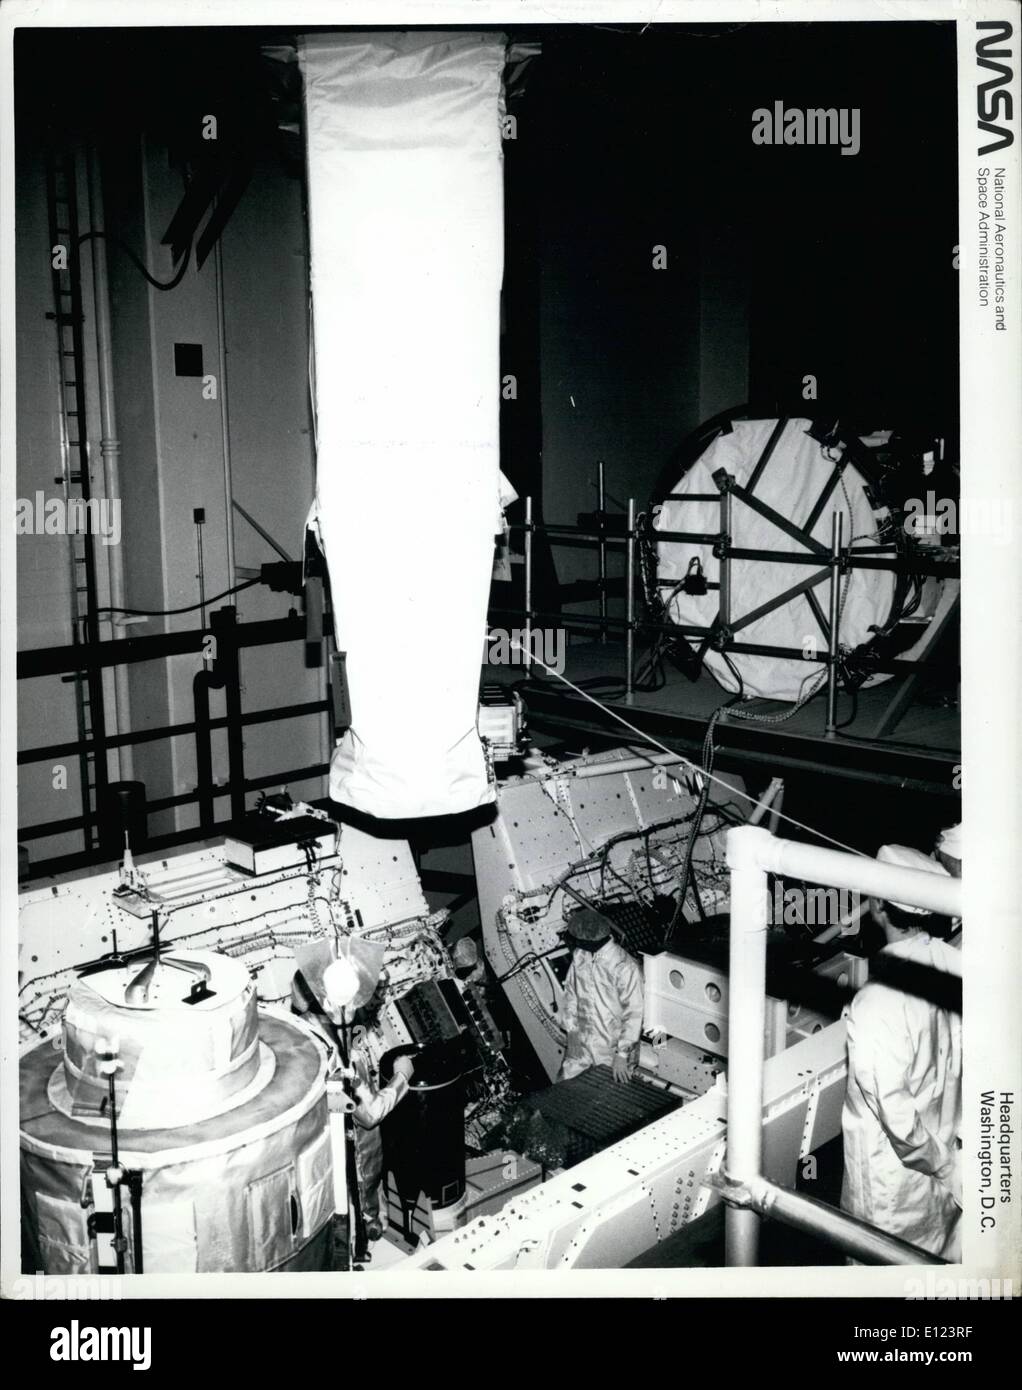 Jun. 06, 1984 - Kennedy Space Center, Fla.,--Technicians install the last major experiment called the ''Hard X-Ray Imaging of Clusters of Galaxies and Other Extended X-Ray Sources,'' on a Space lab 2 pallet in the Operations and Checkout train and will mark the first flight of the Igloo and Instrument Pointing System. The experiment, which consists of two identical X-ray telescopes will record images and spectra of extended X-ray sources which will be used to identify the sources and omission mechanisms Stock Photo